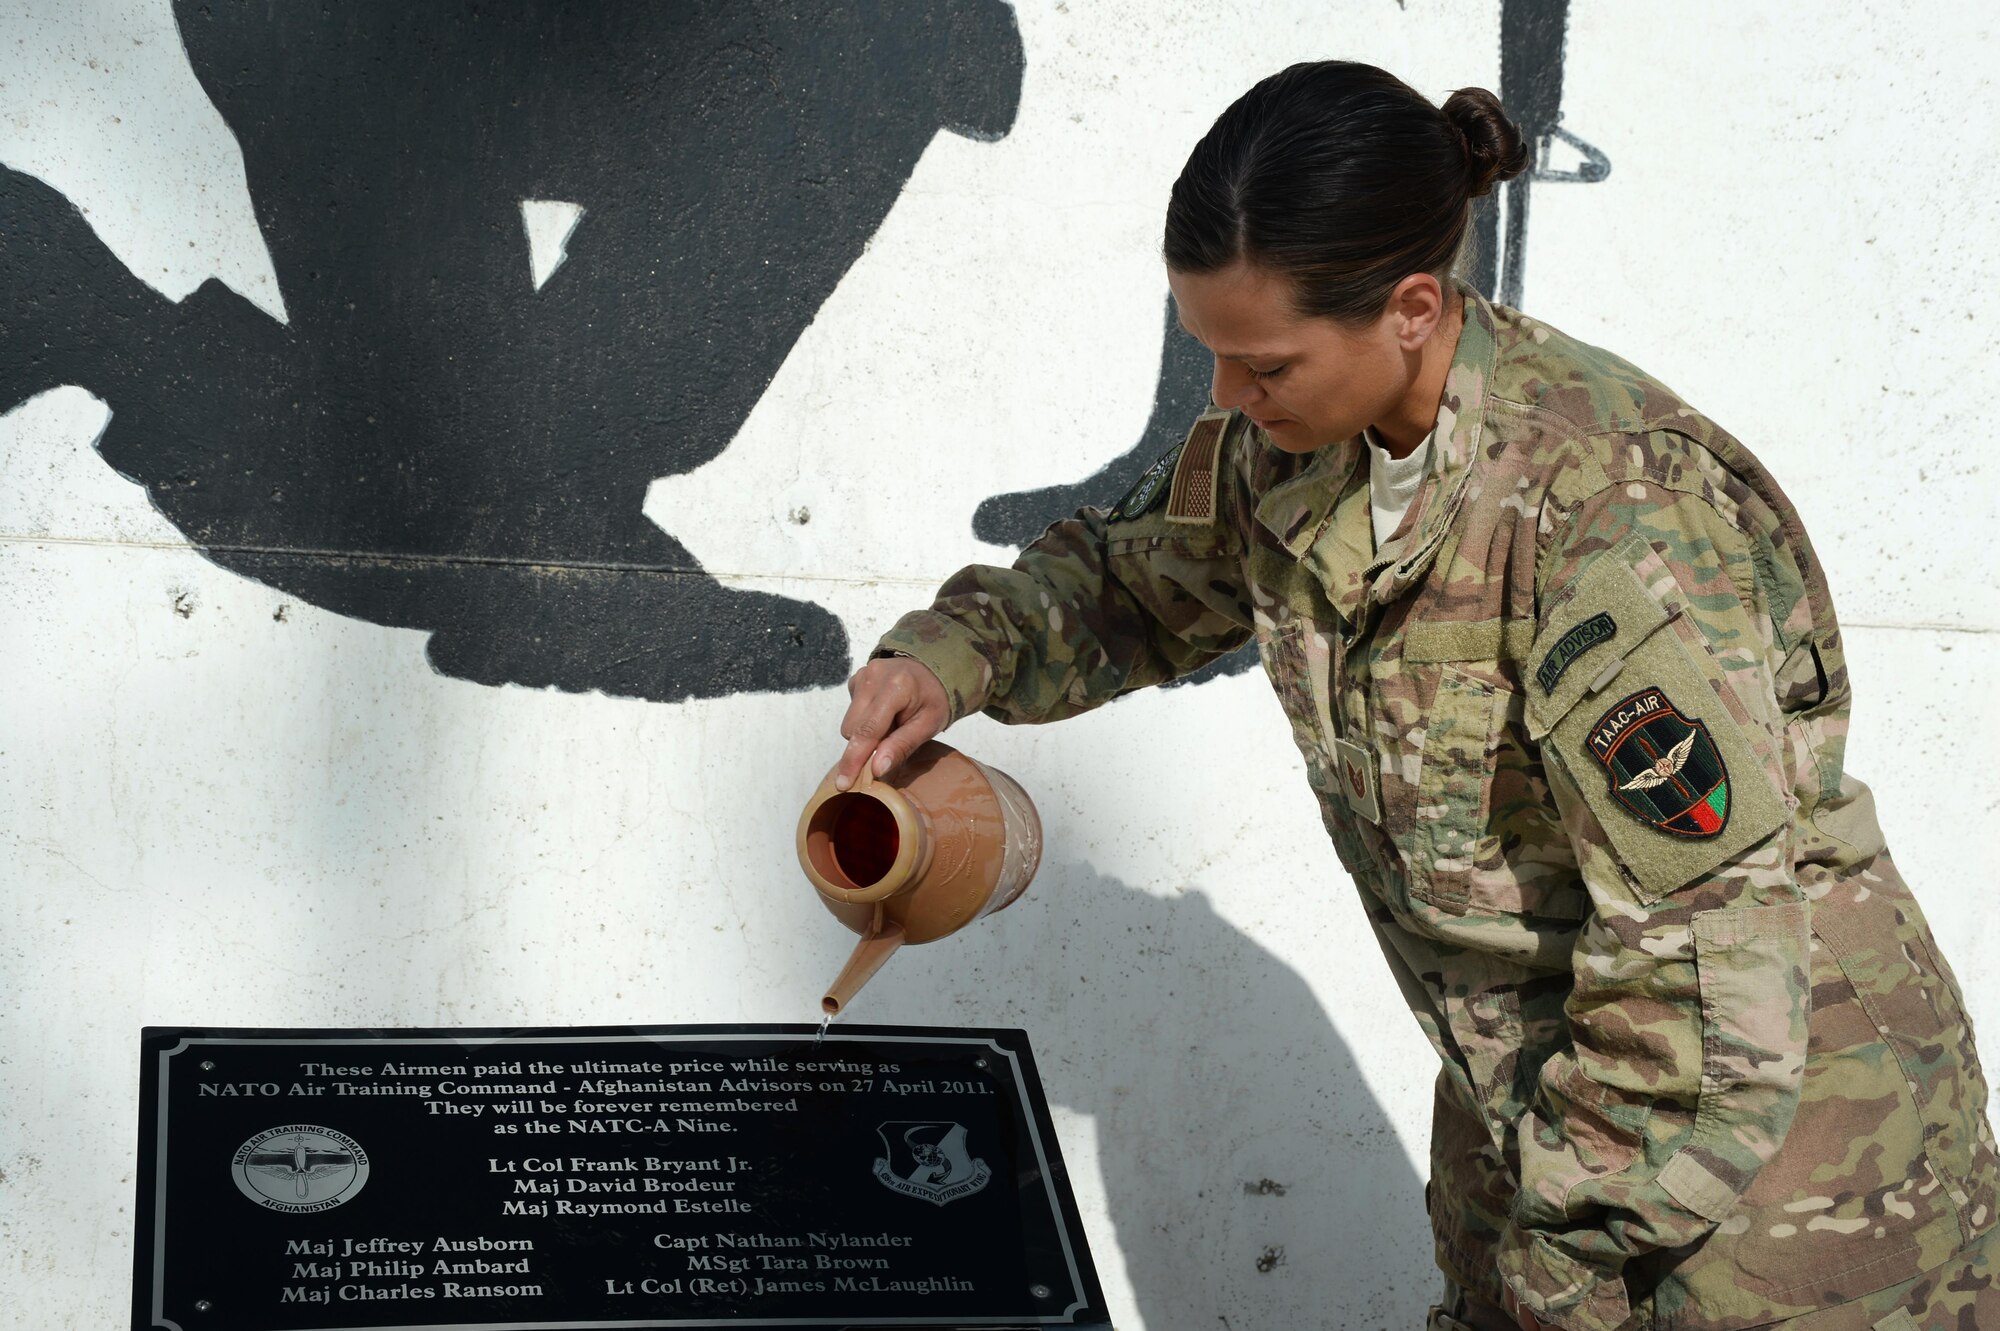 U.S. Air Force Tech. Sgt. Valarie, Train, Advise, Assist Command – Air (TAAC-Air), clean off the plaque at the NATO Air Training Command – Afghanistan (NATC-A) Nine Memorial Forward Operating Base Oqab, Afghanistan, Sept. 22, 2015. The 438th Air Expeditionary Advisor Group with funds and donations by the Enlisted Coalition Council built the NATC-A Nine Memorial in April 2013. (U.S. Air Force photo by Staff Sgt. Sandra Welch/released)